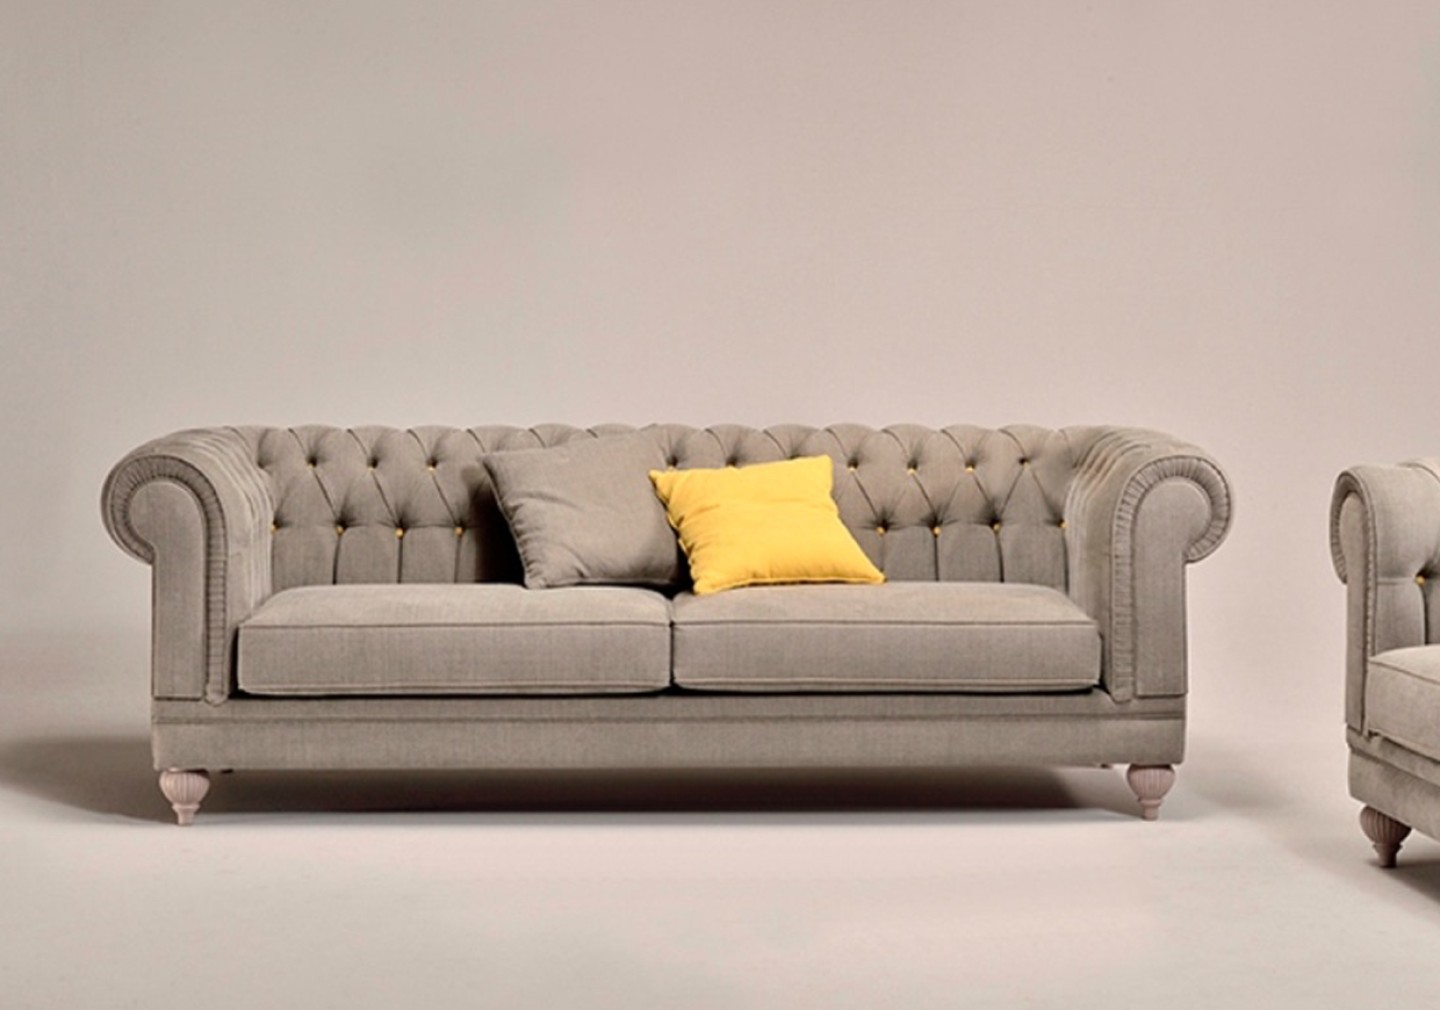 THE CHESTERFIELD CLASSIC SOFA